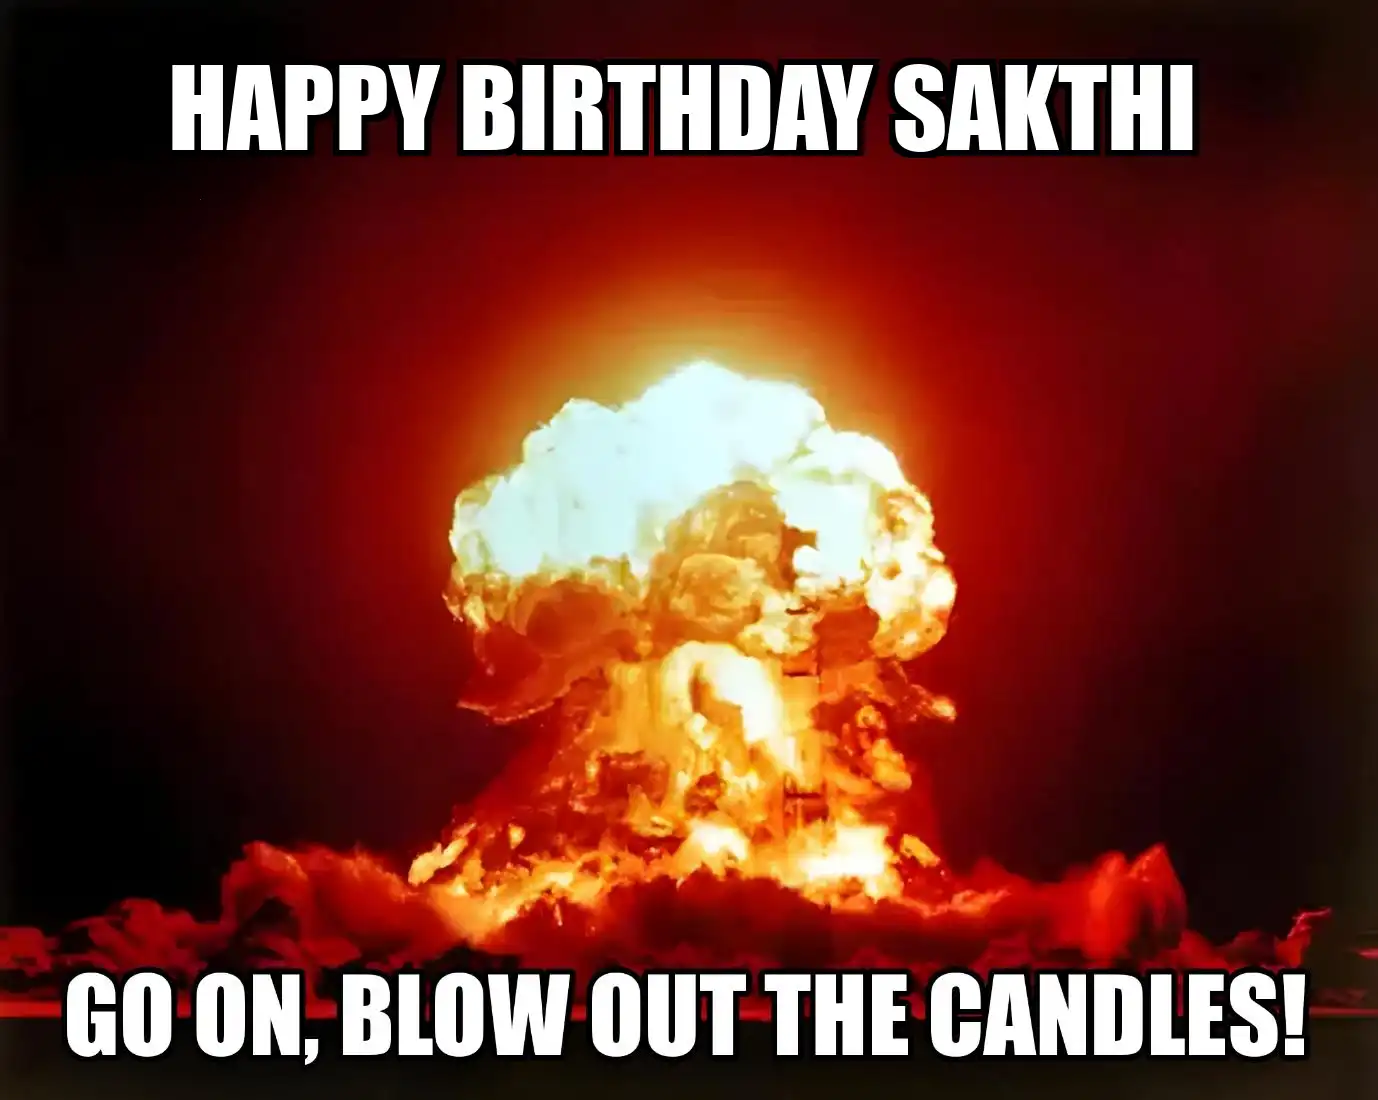 Happy Birthday Sakthi Go On Blow Out The Candles Meme